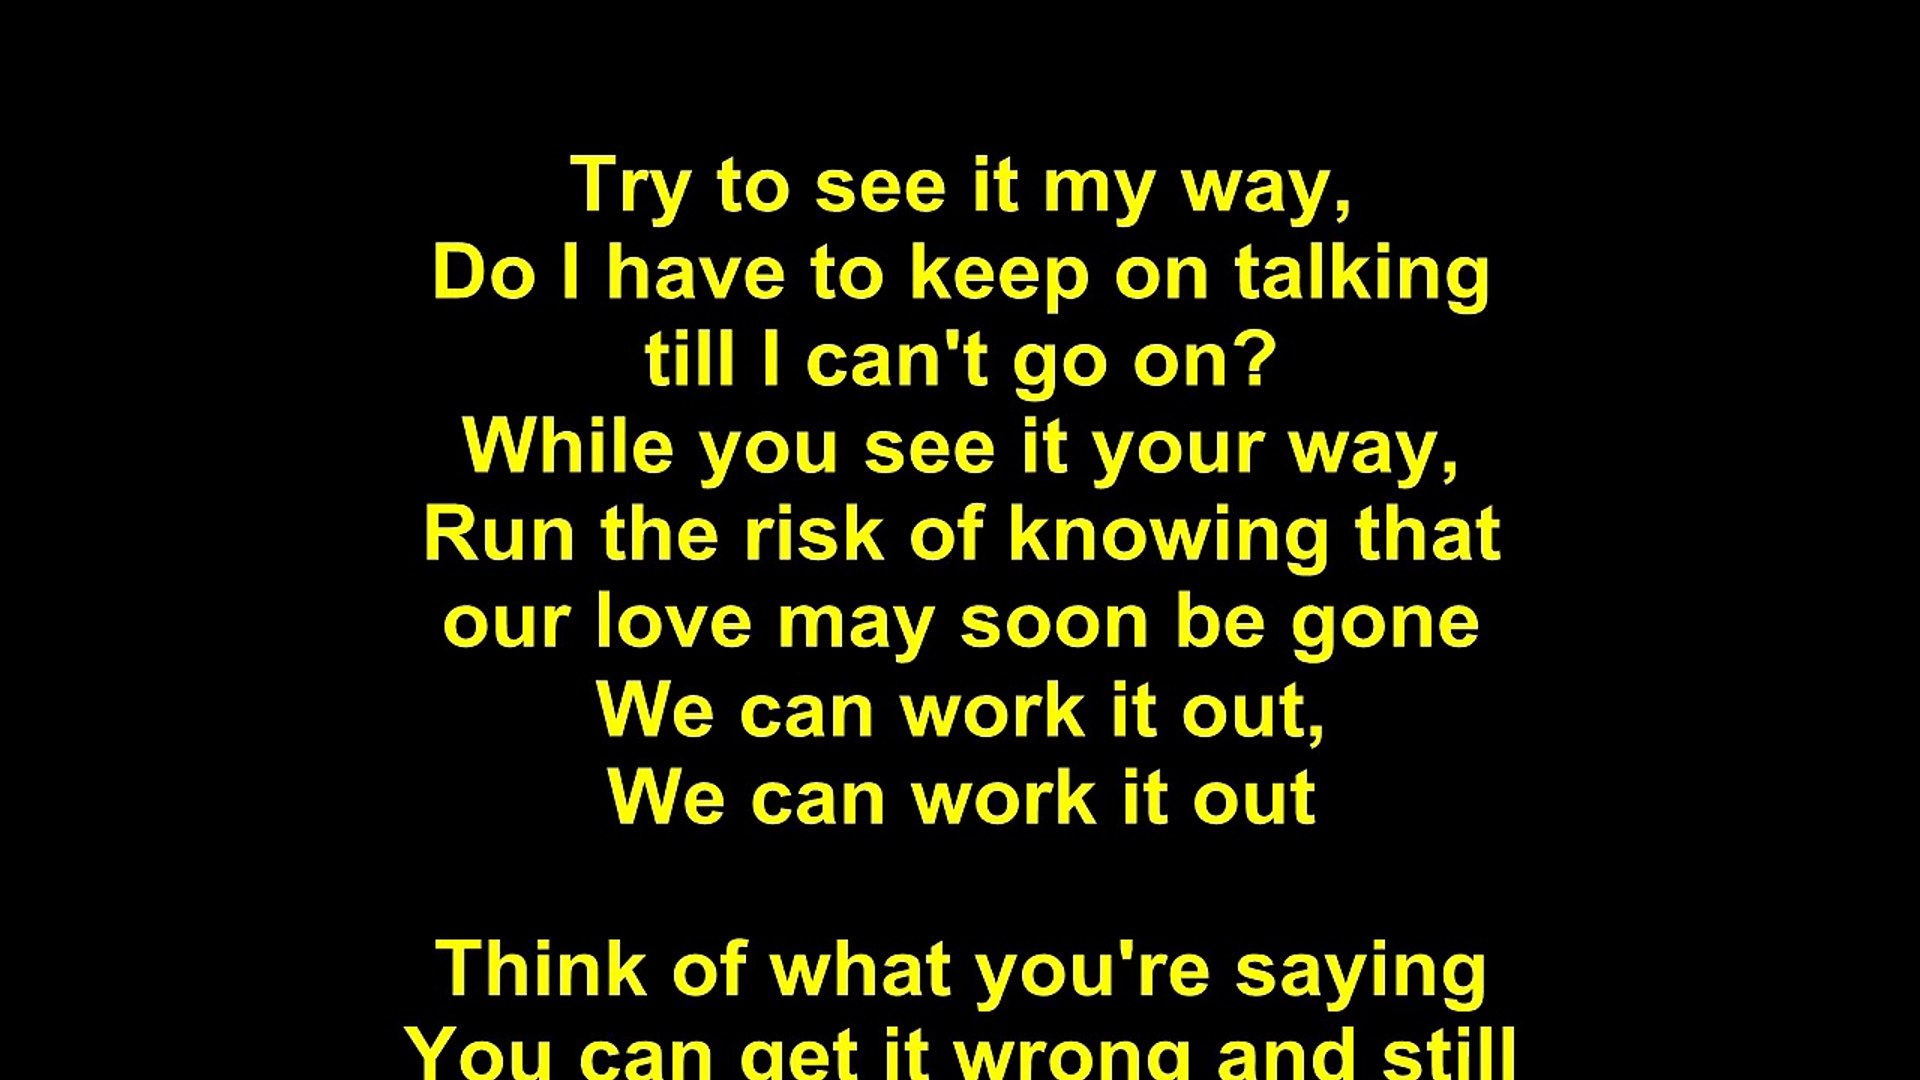 Beatles – We Can Work It Out Lyrics - video Dailymotion